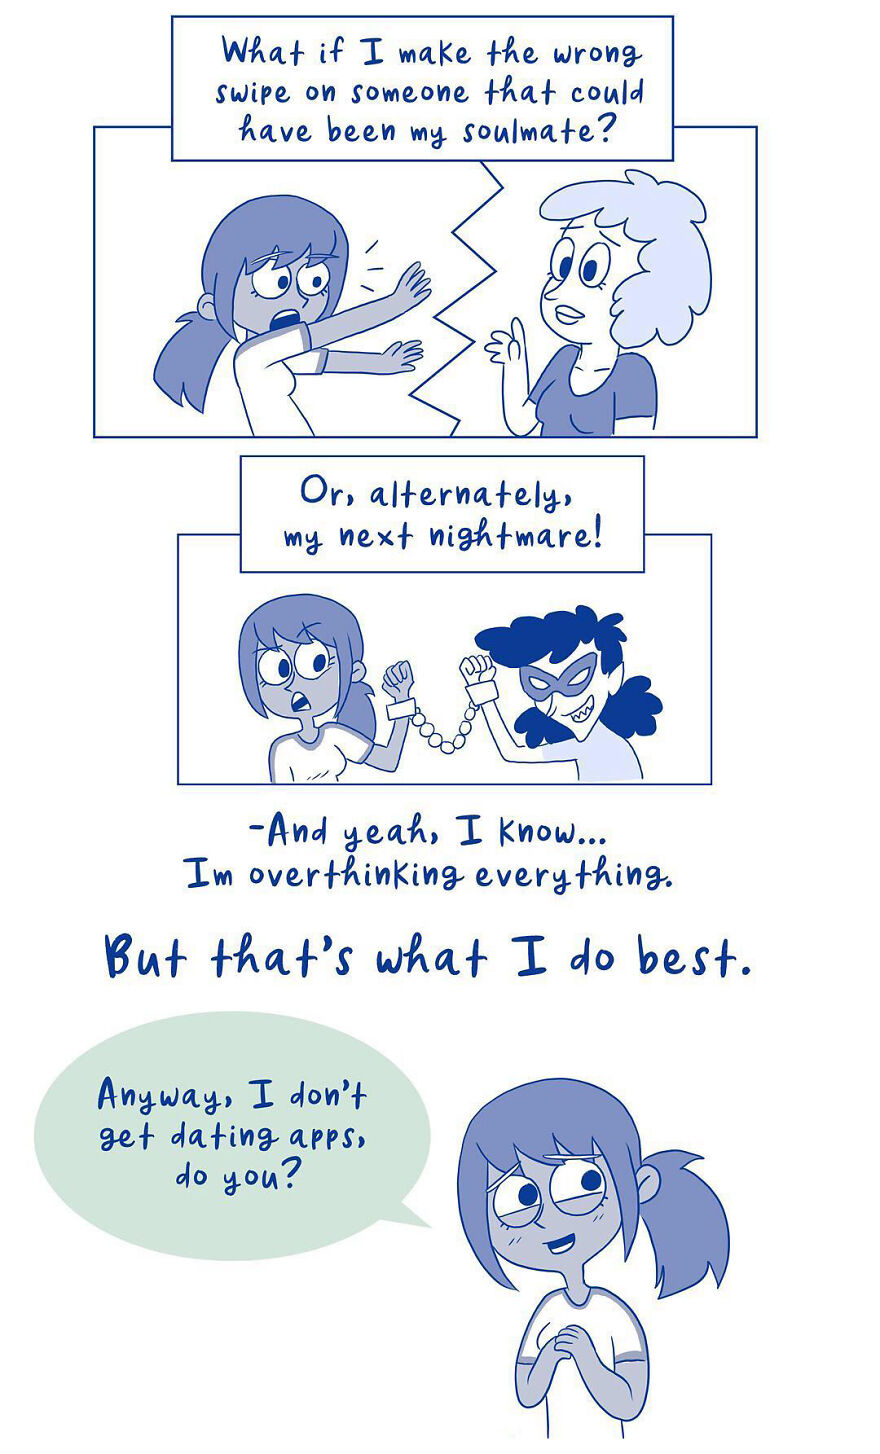 Artist Created Comics Based On Her Experiences In The Queer Dating World